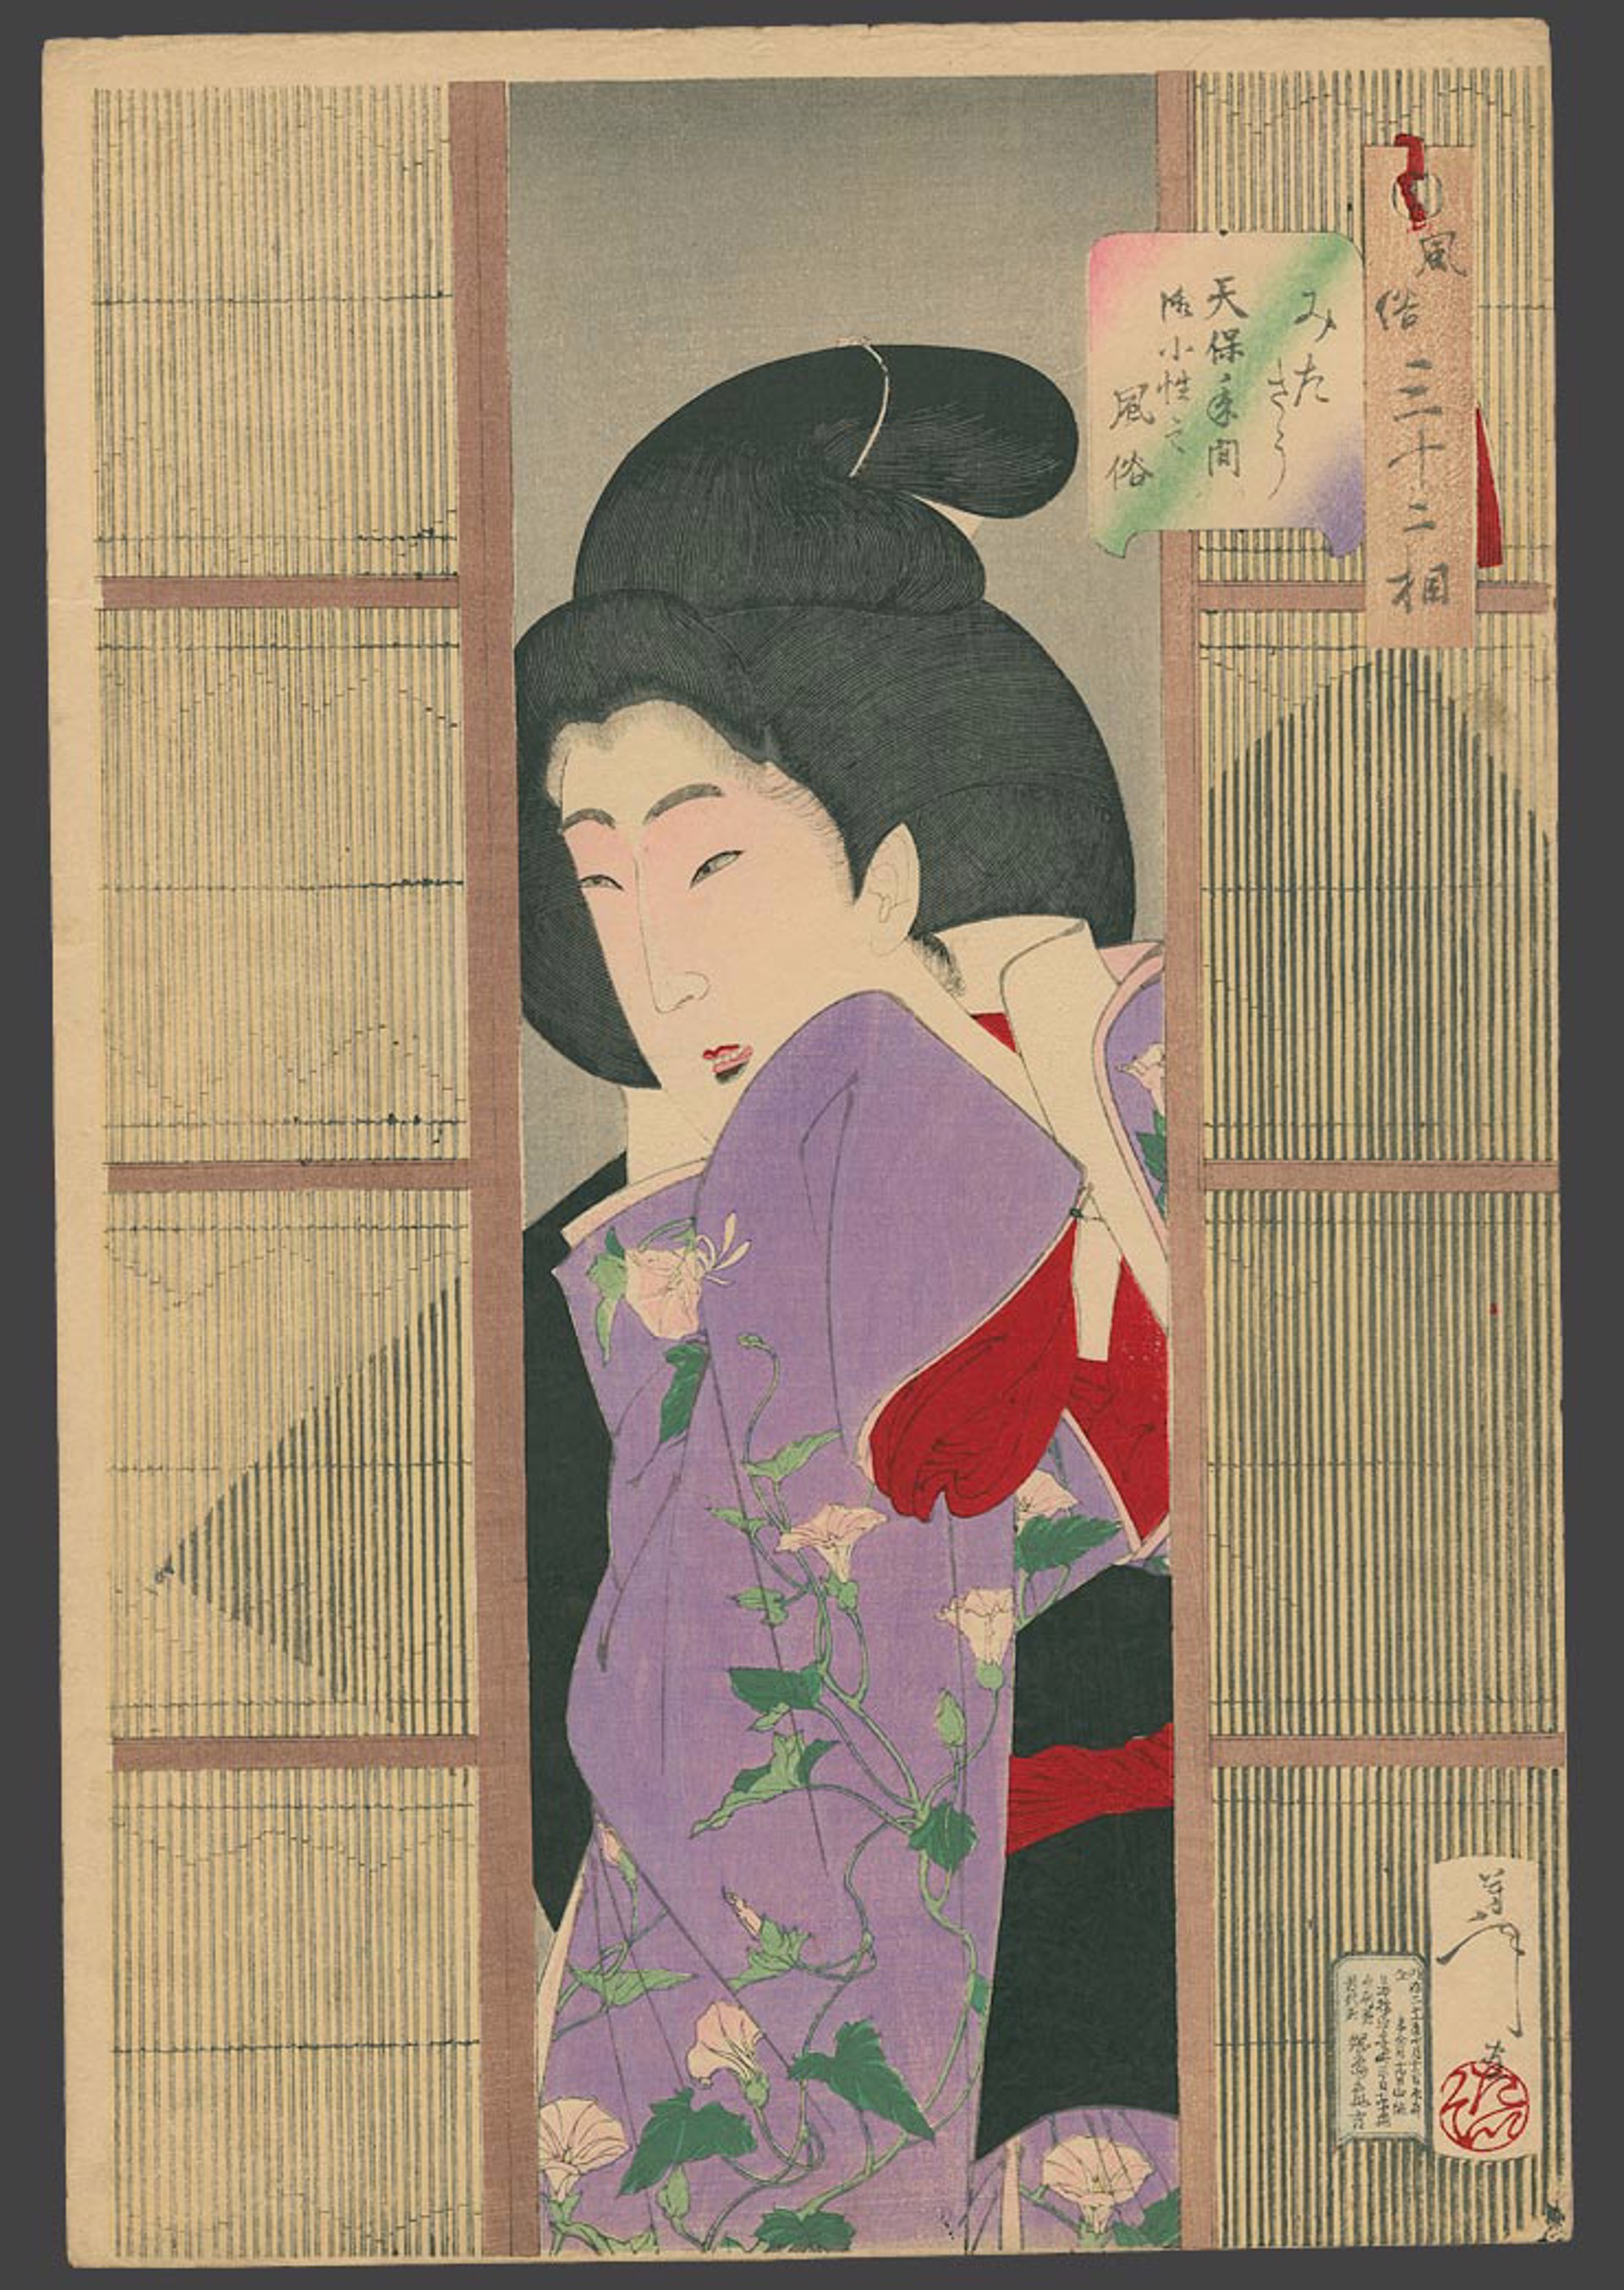 Looking inquisitive: A maid in the Tenpo era (1830-44) 32 Aspects of Women by Yoshitoshi